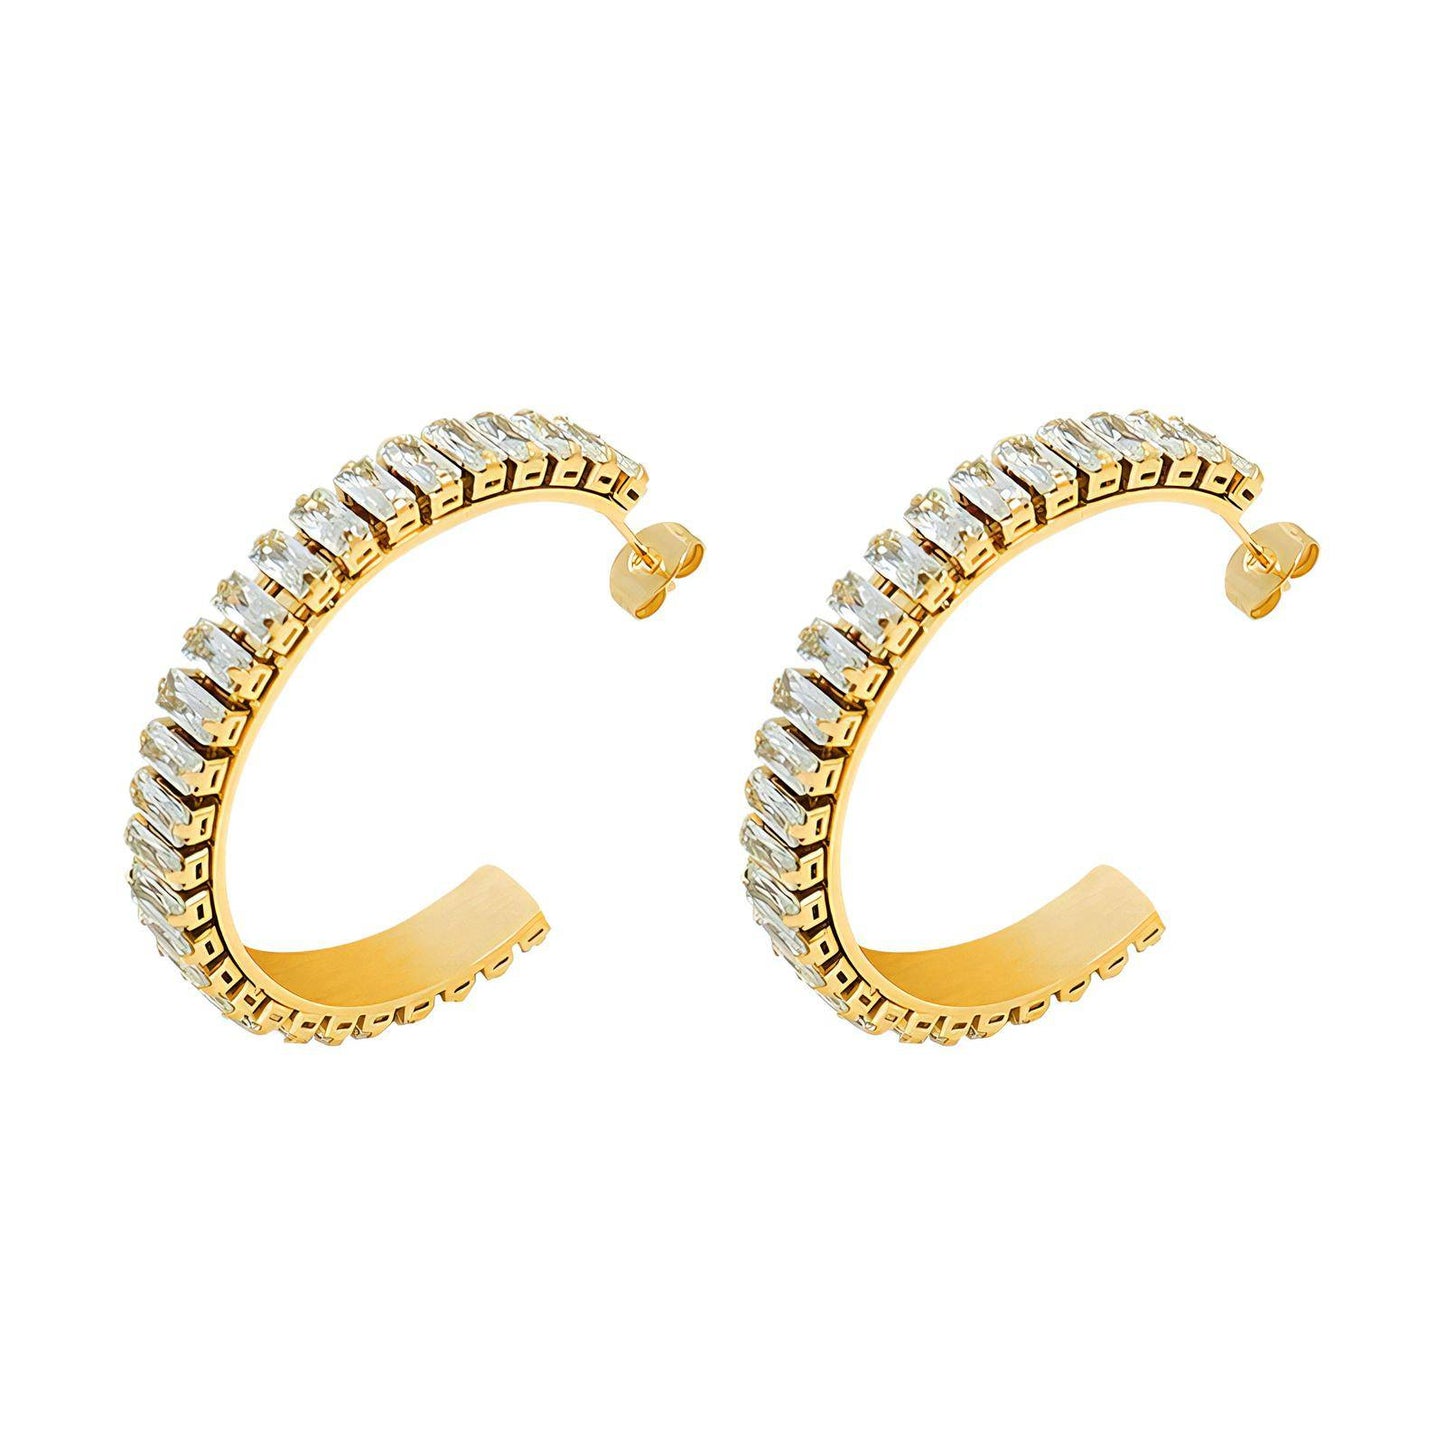 18K gold plated stainless steel w/cubic zirconia earrings